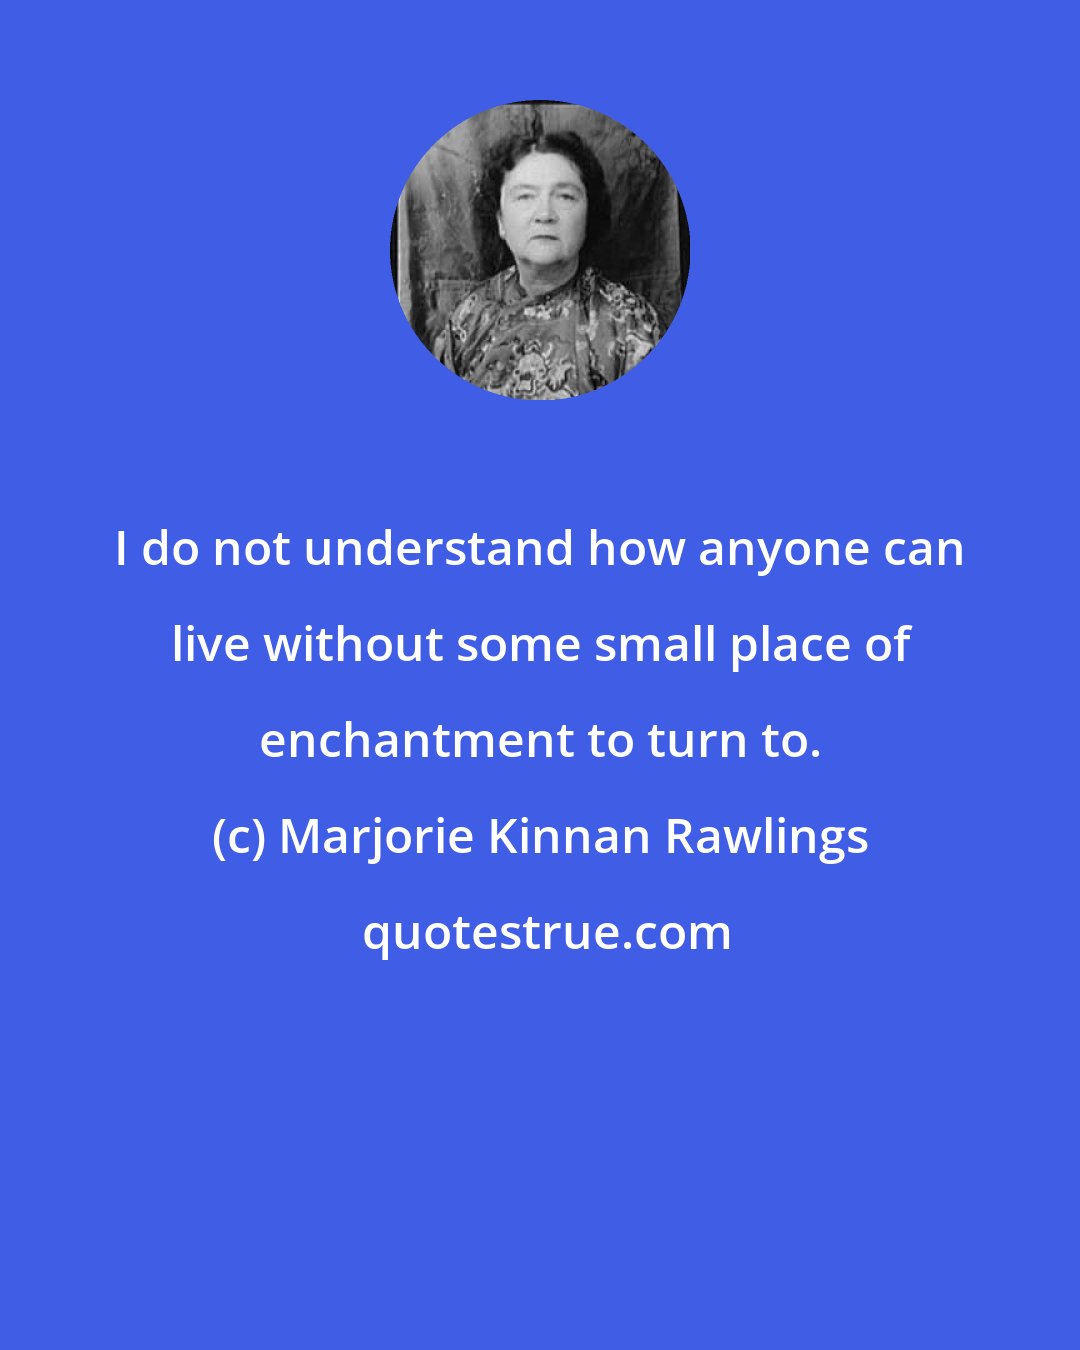 Marjorie Kinnan Rawlings: I do not understand how anyone can live without some small place of enchantment to turn to.